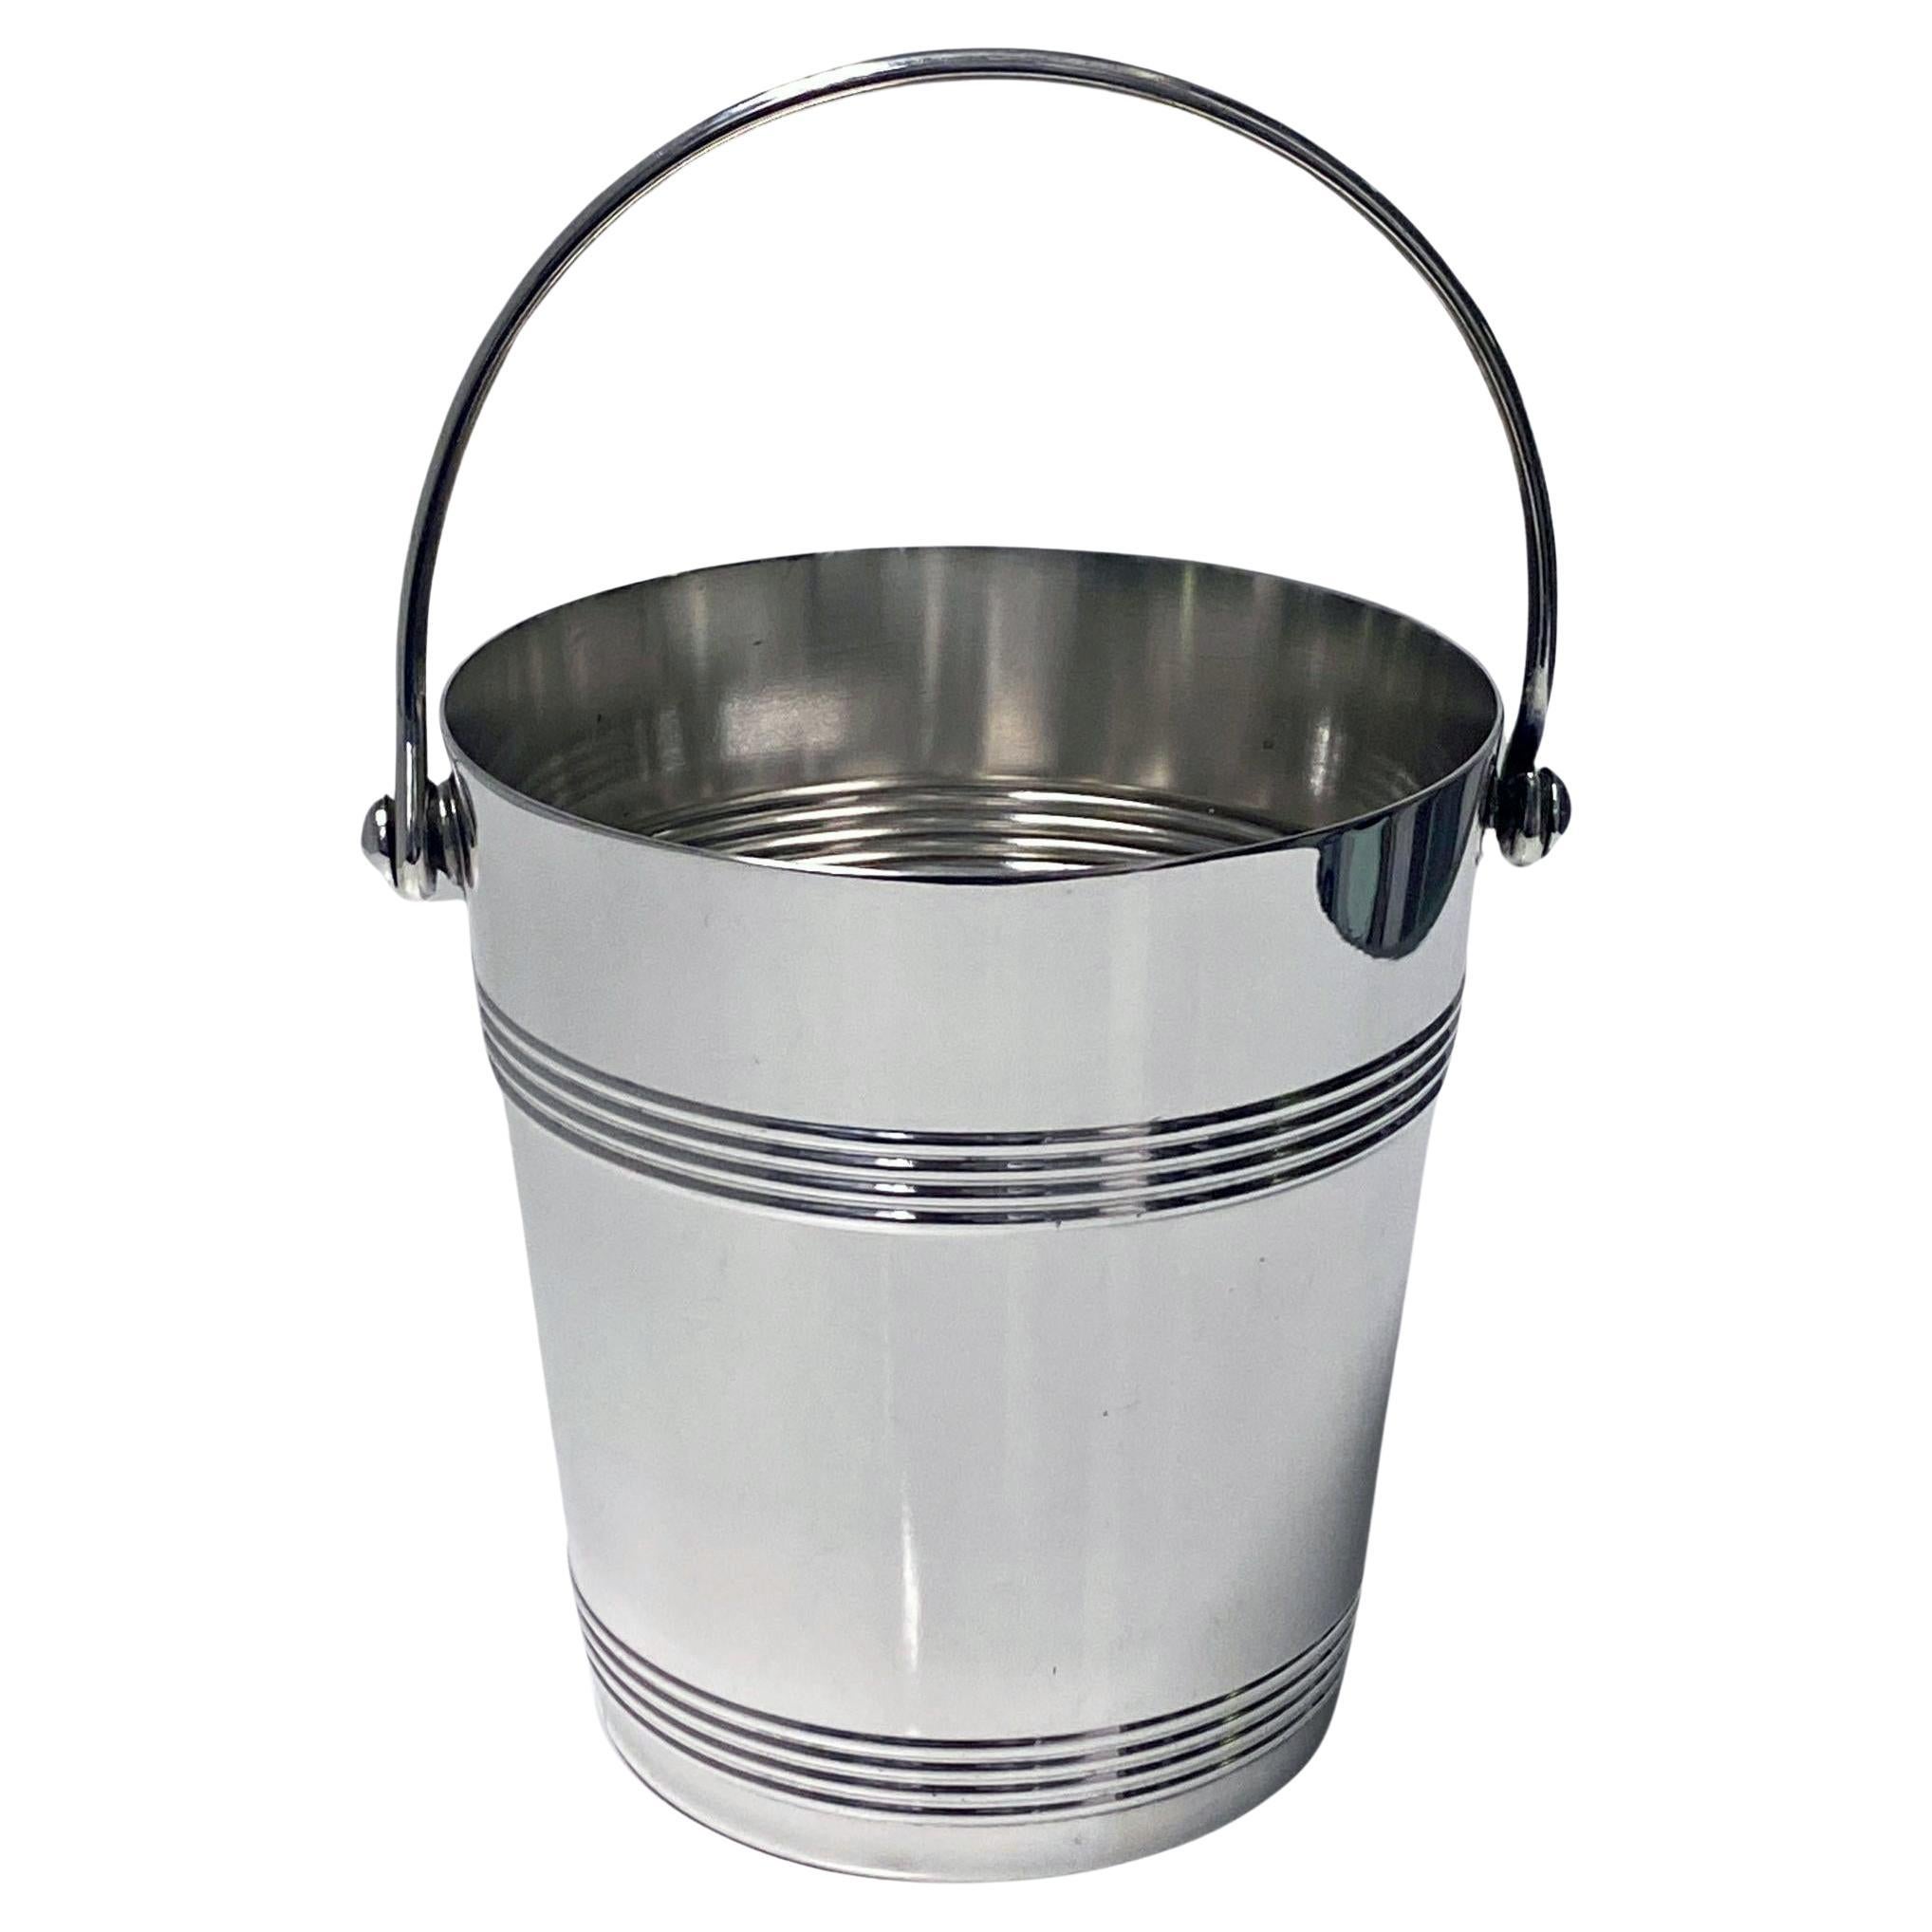 Art Deco Christofle silver plate cooler or ice bucket, France, circa 1930